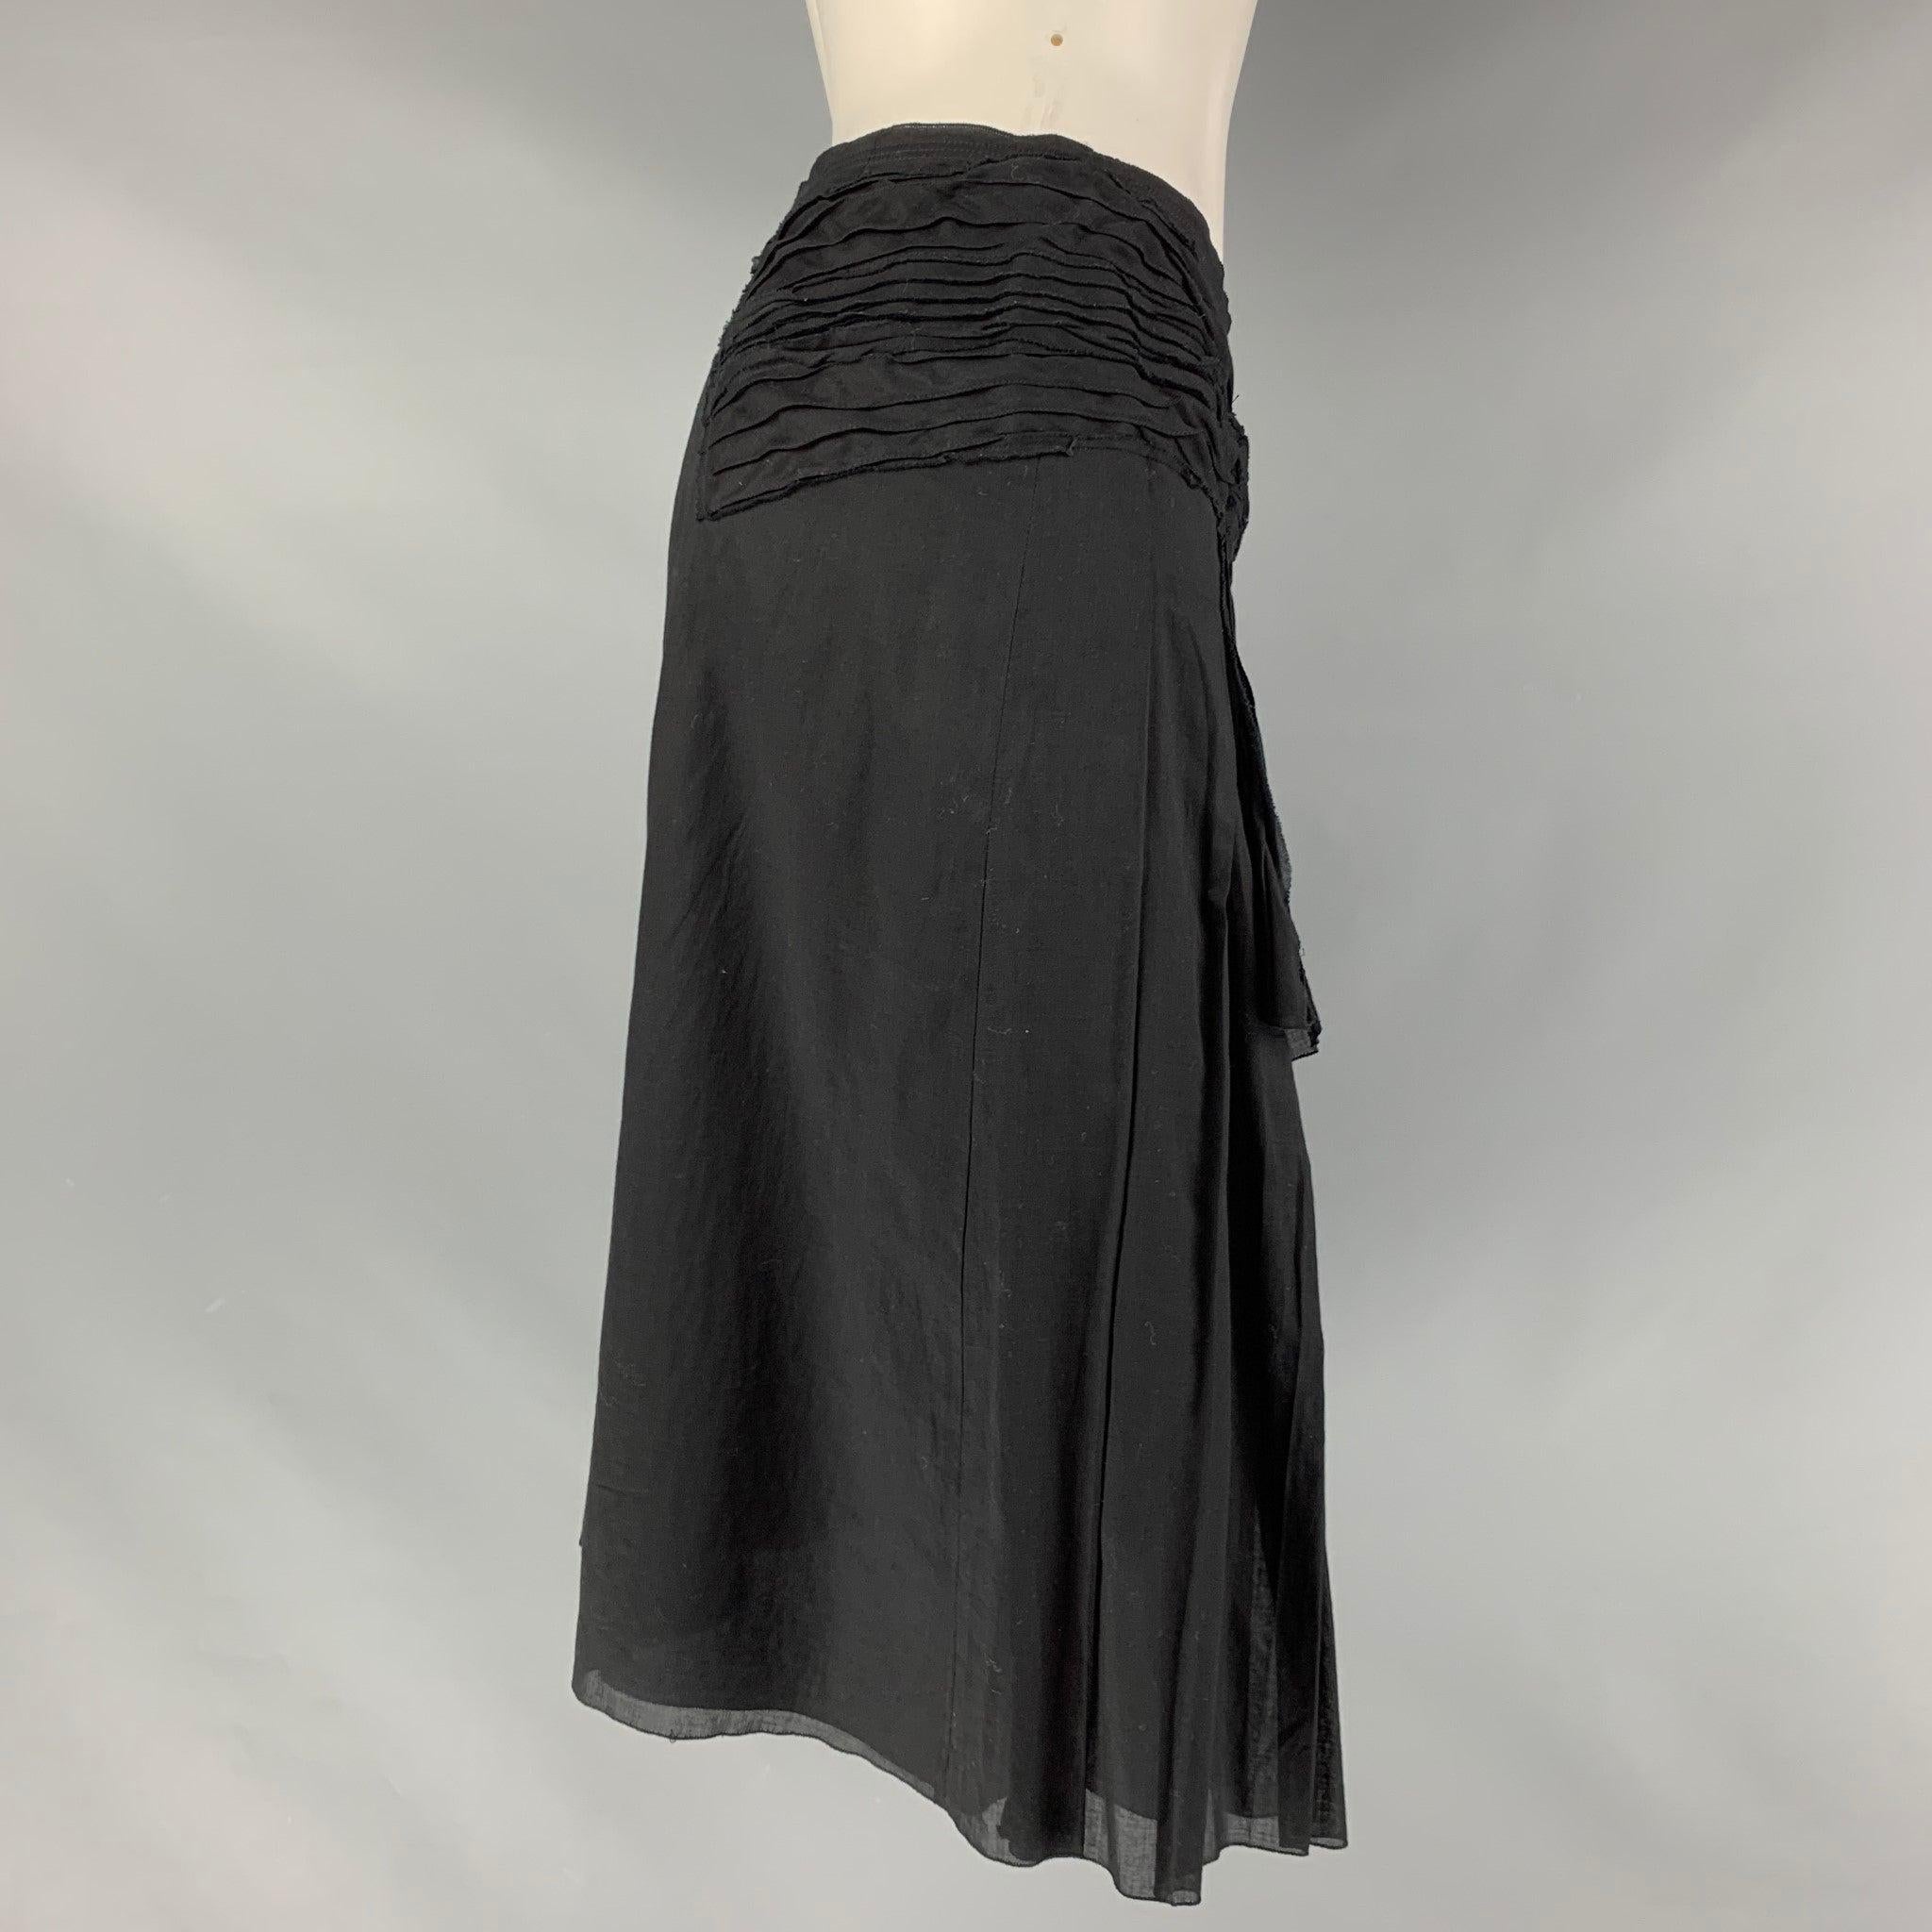 PRADA a-line skirt comes in a black cotton fabric featuring a bow applique at front, and a side zipper closure. Made in Italy.Excellent Pre-Owned Condition. 

Marked:   38 

Measurements: 
  Waist: 28 inches Hip: 37 inches Length: 23.5 inches  

  
